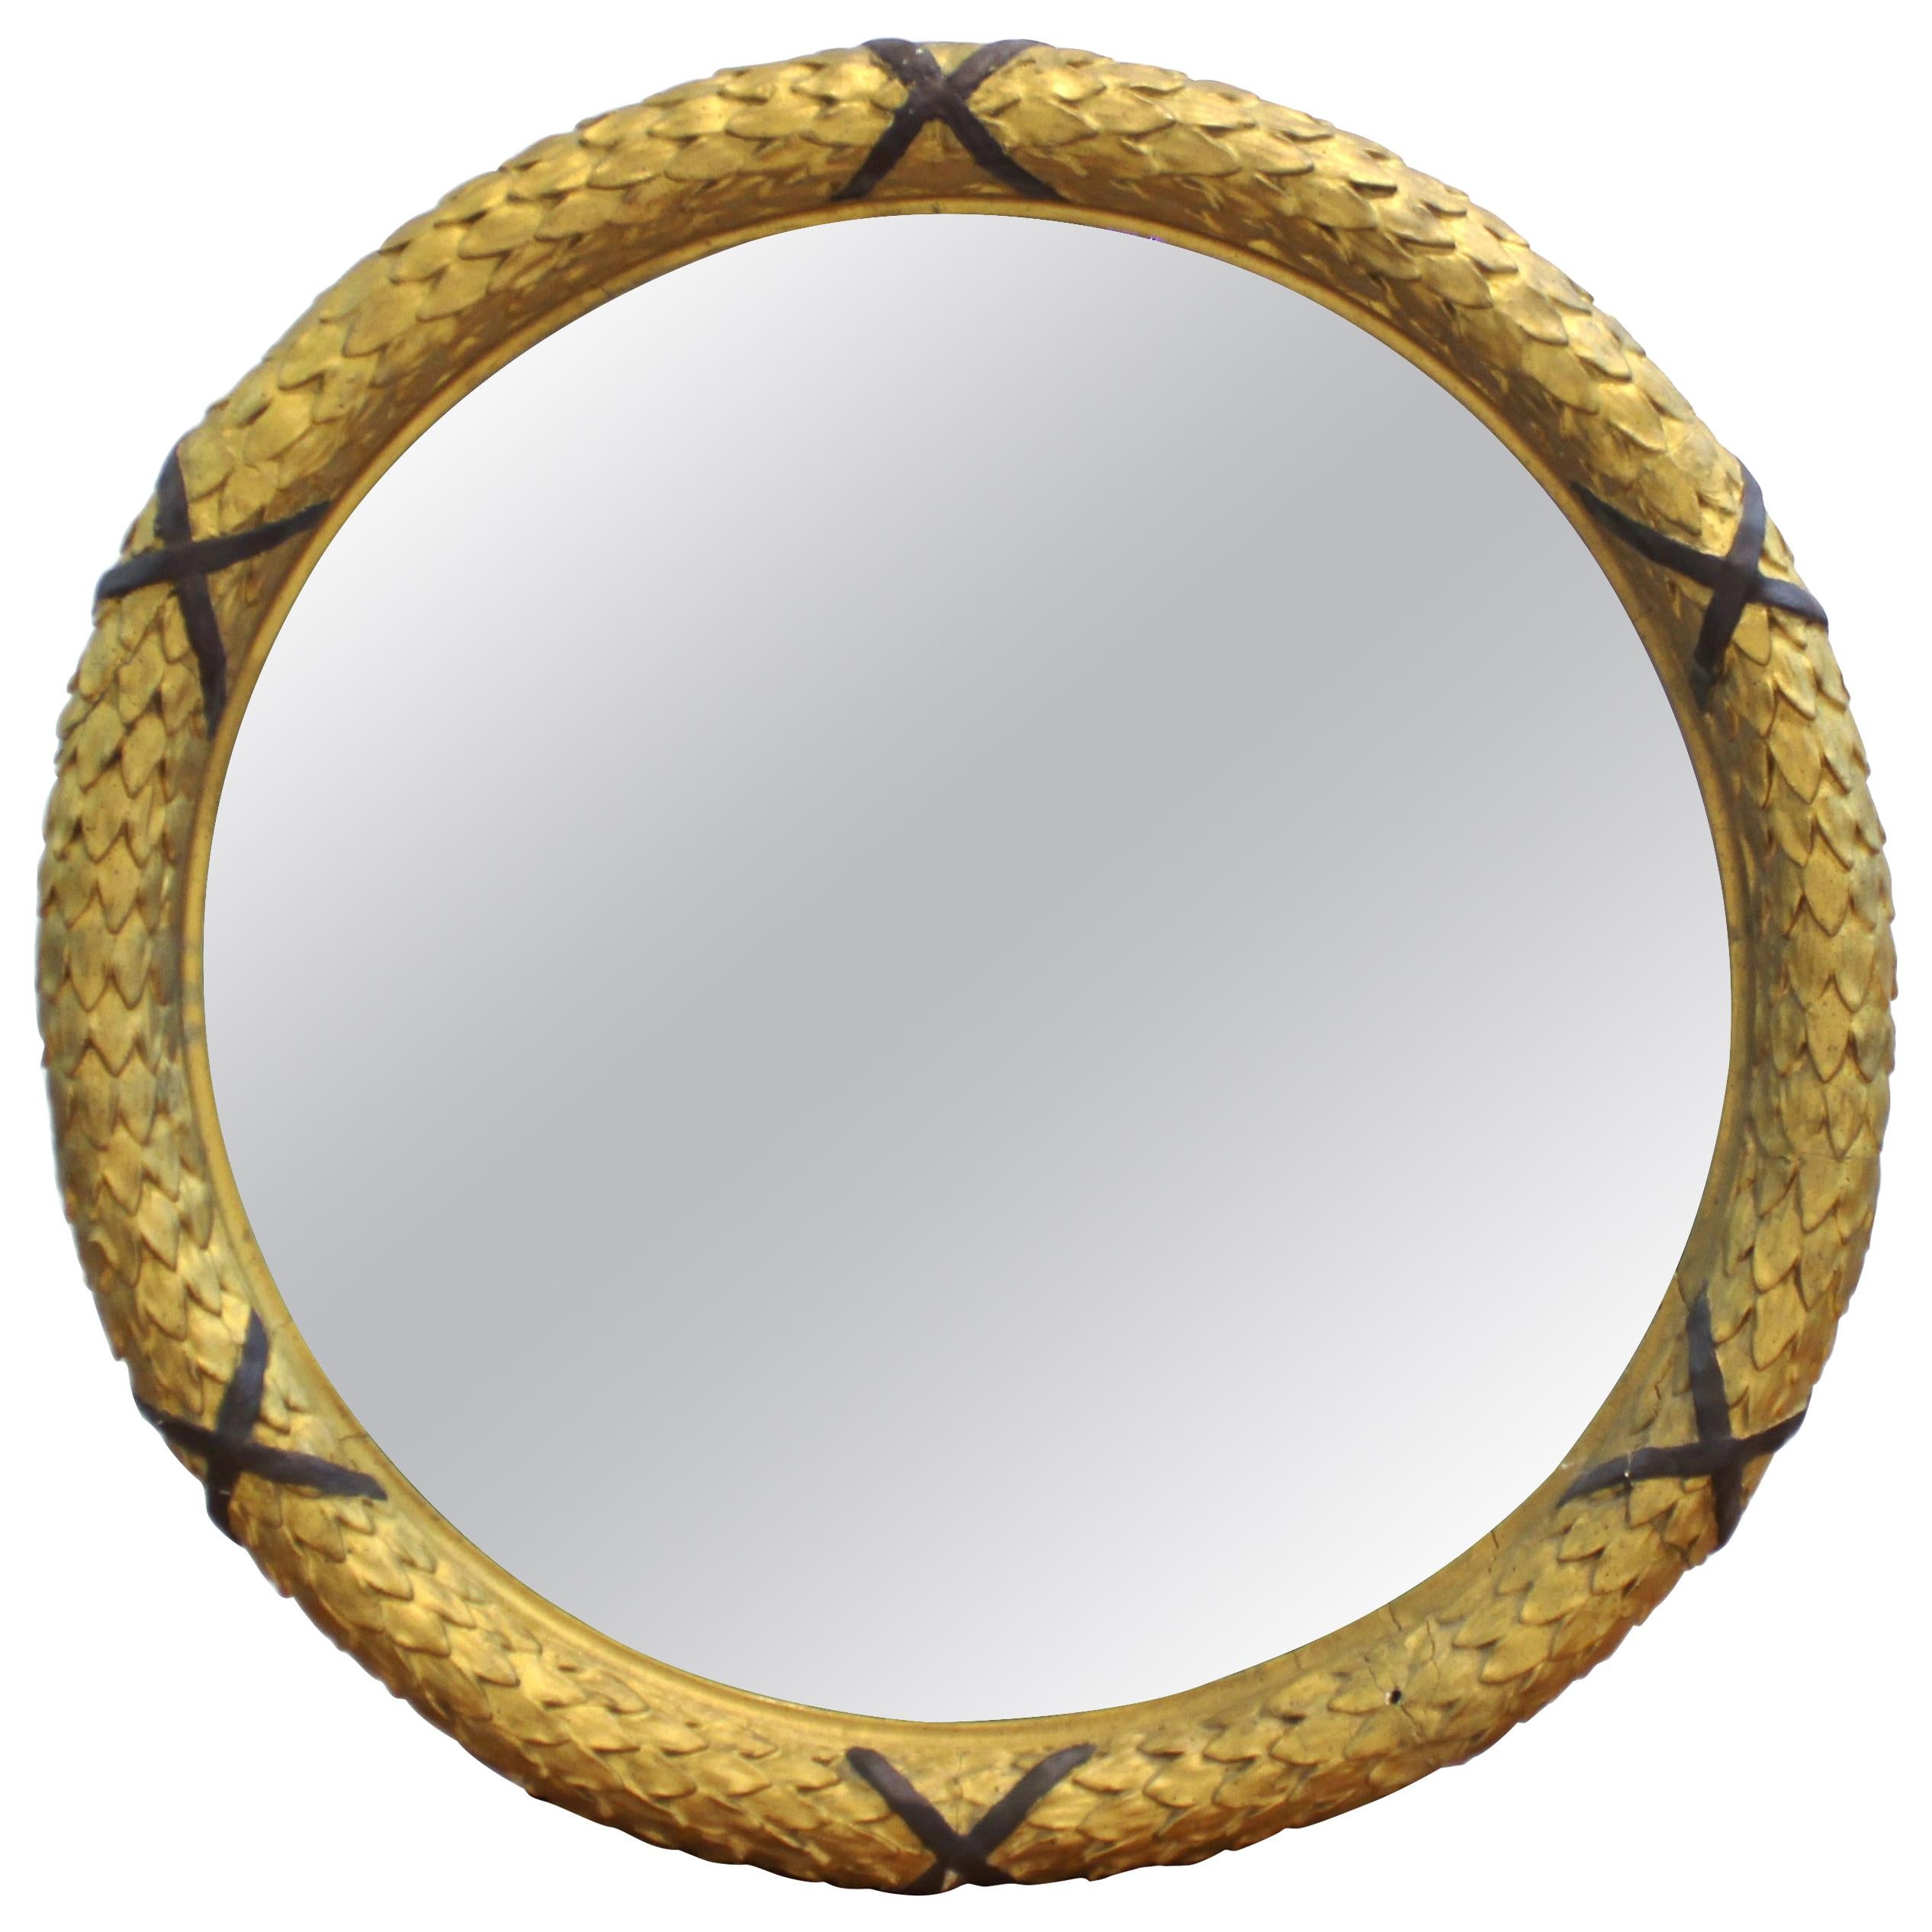 Empire Style Carved GIltwood Round Wall Mirror 